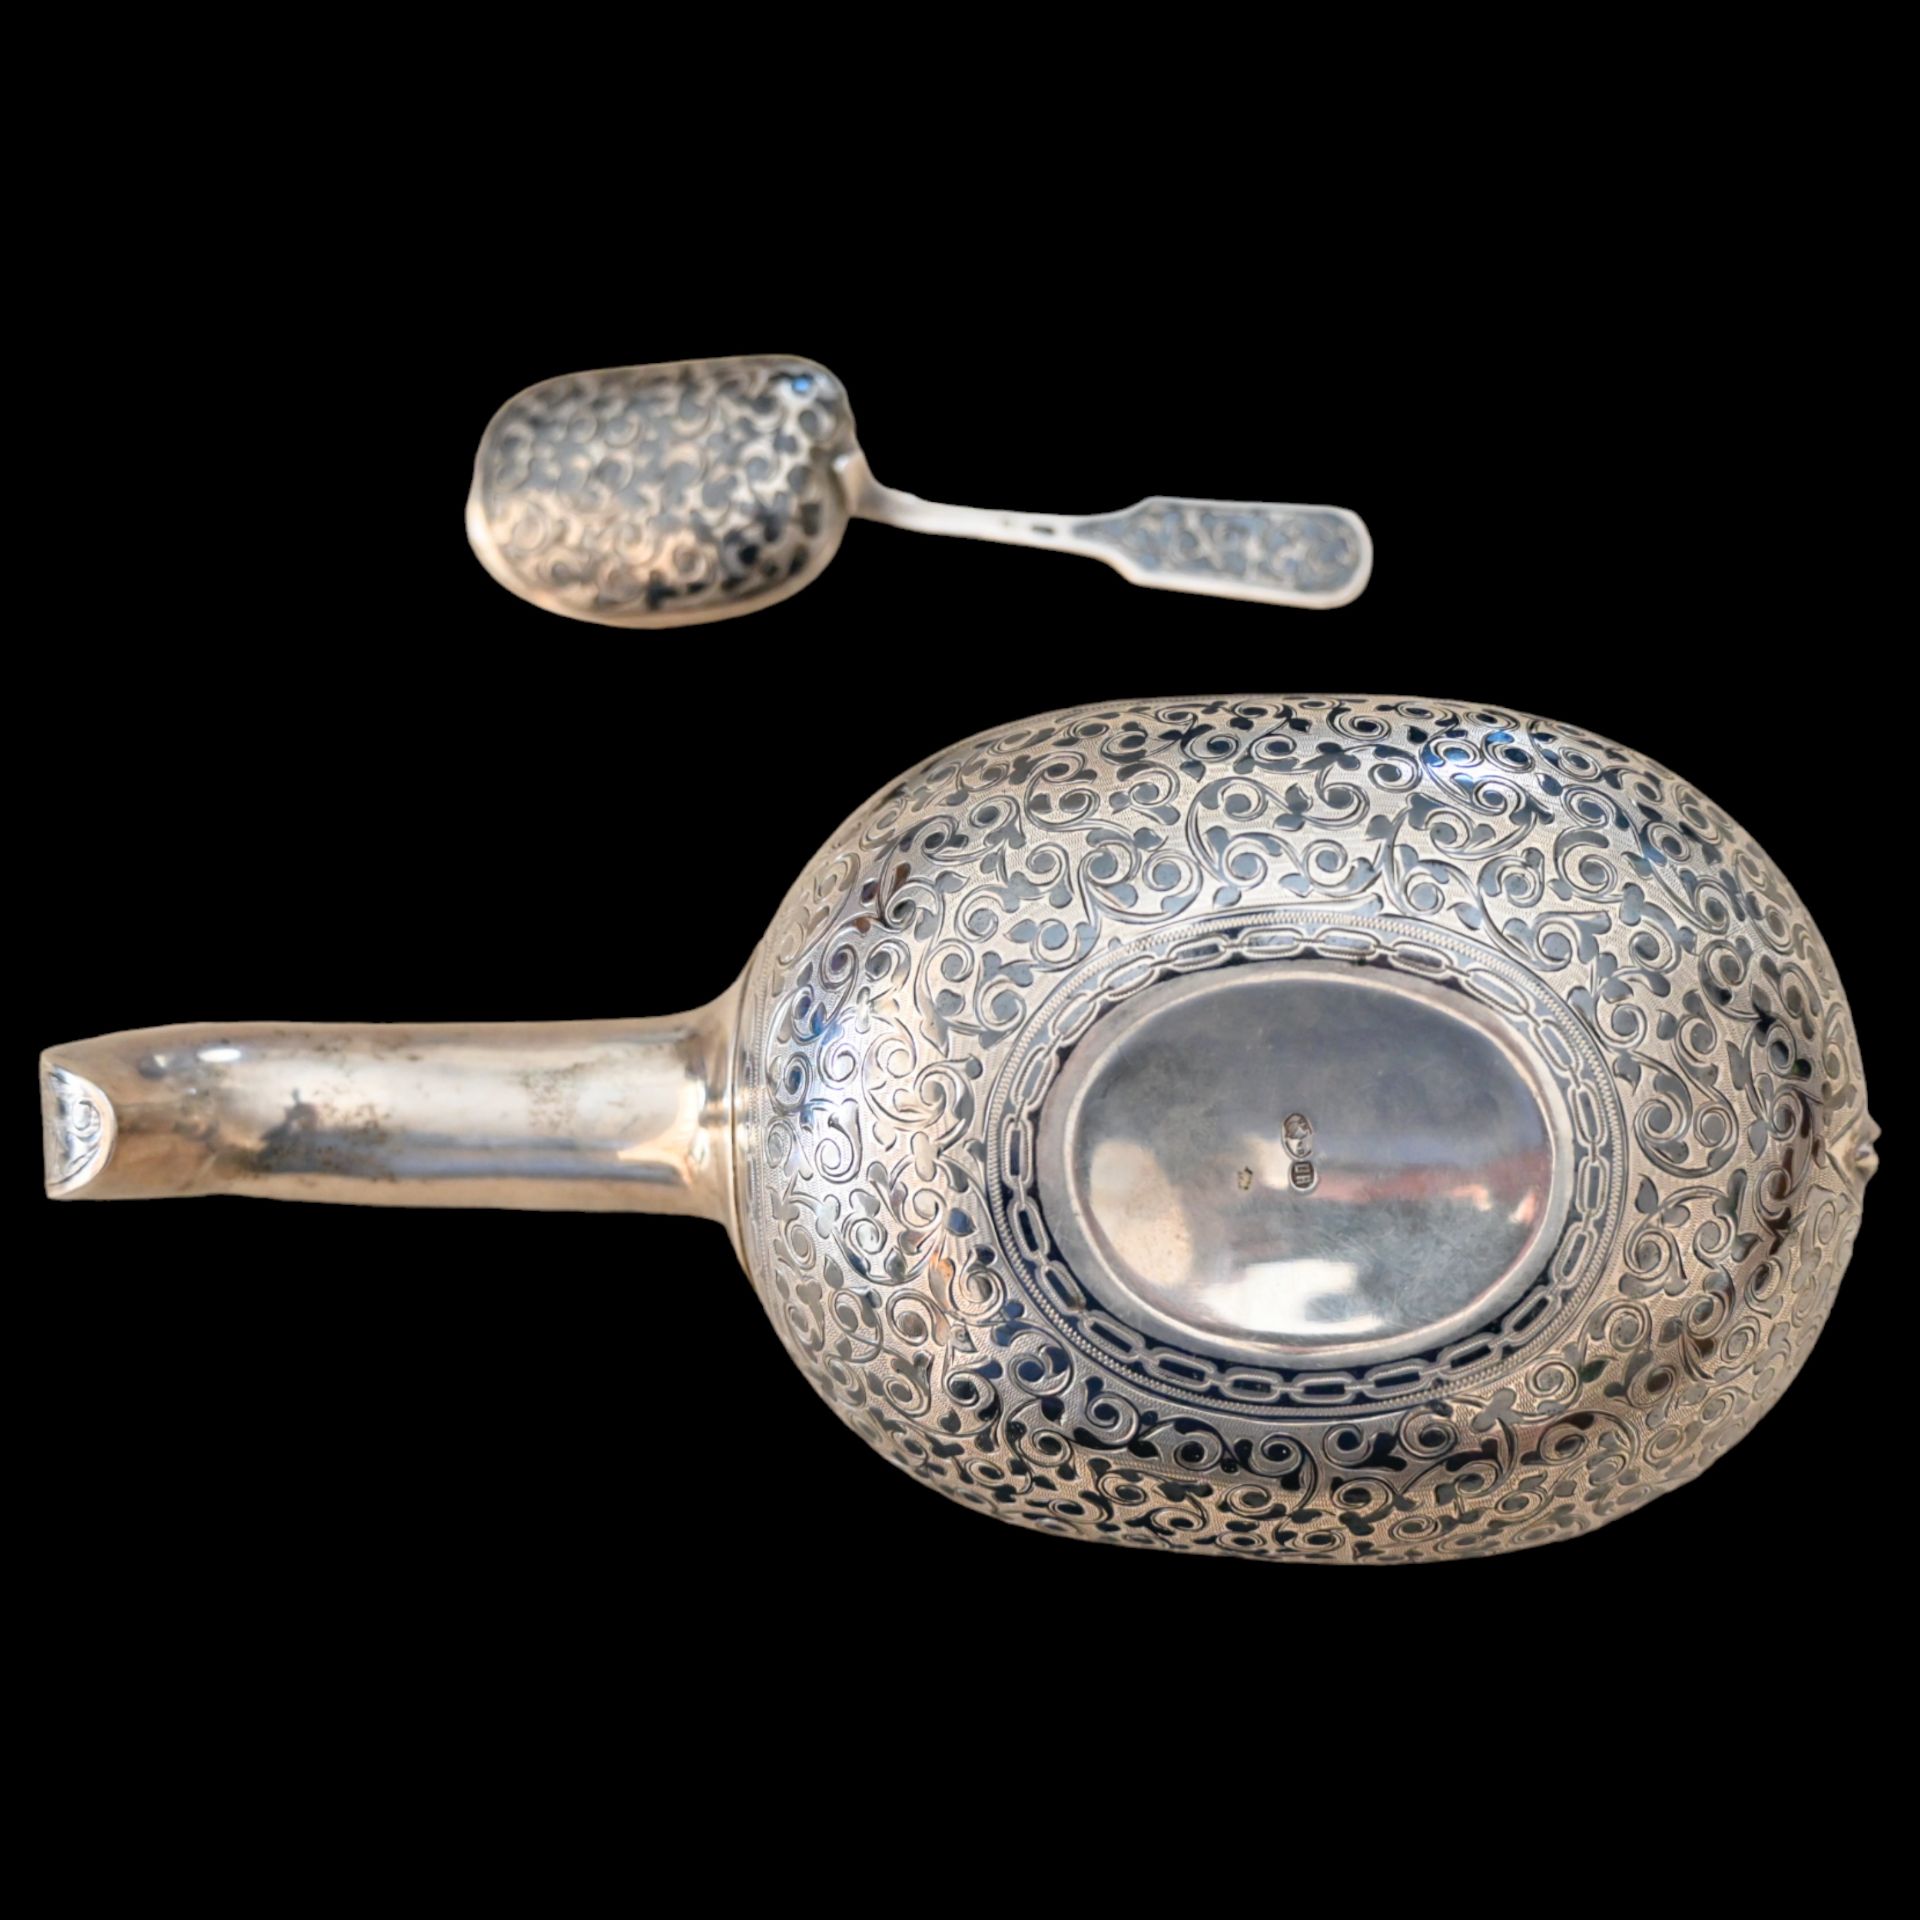 Silver kovsh and spoon decorated with niello, Russian Empire, late 19th C., jeweler Nikolai Pavlov. - Image 2 of 10